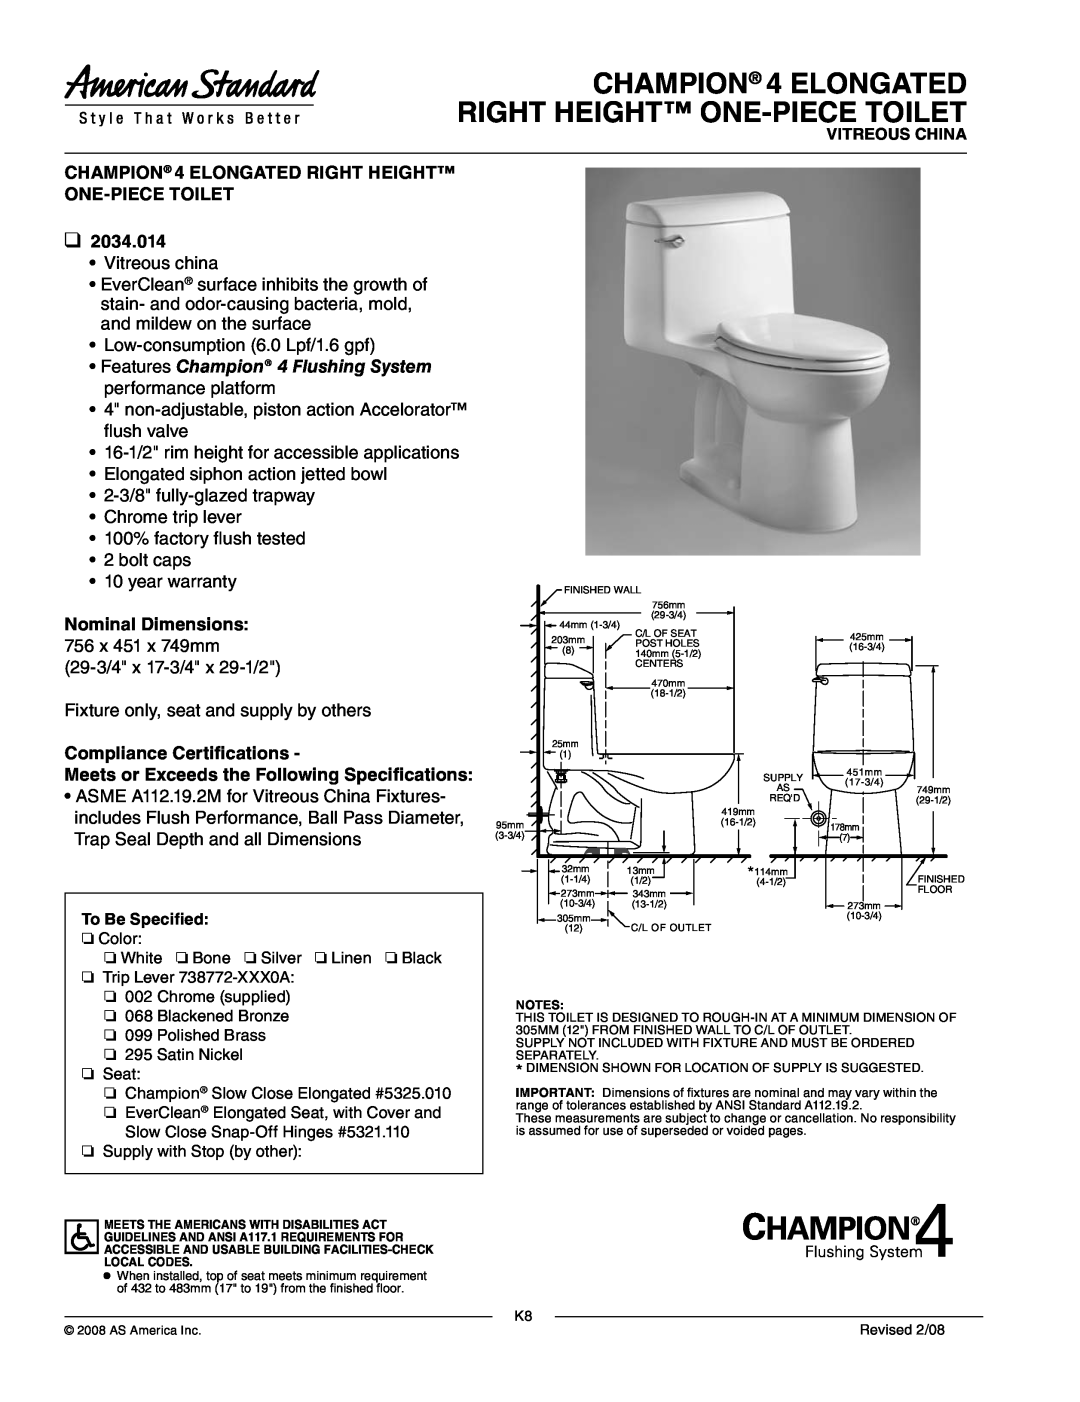 American Standard 2034.014 warranty CHAMPION 4 ELONGATED RIGHT HEIGHT ONE-PIECETOILET, Nominal Dimensions 